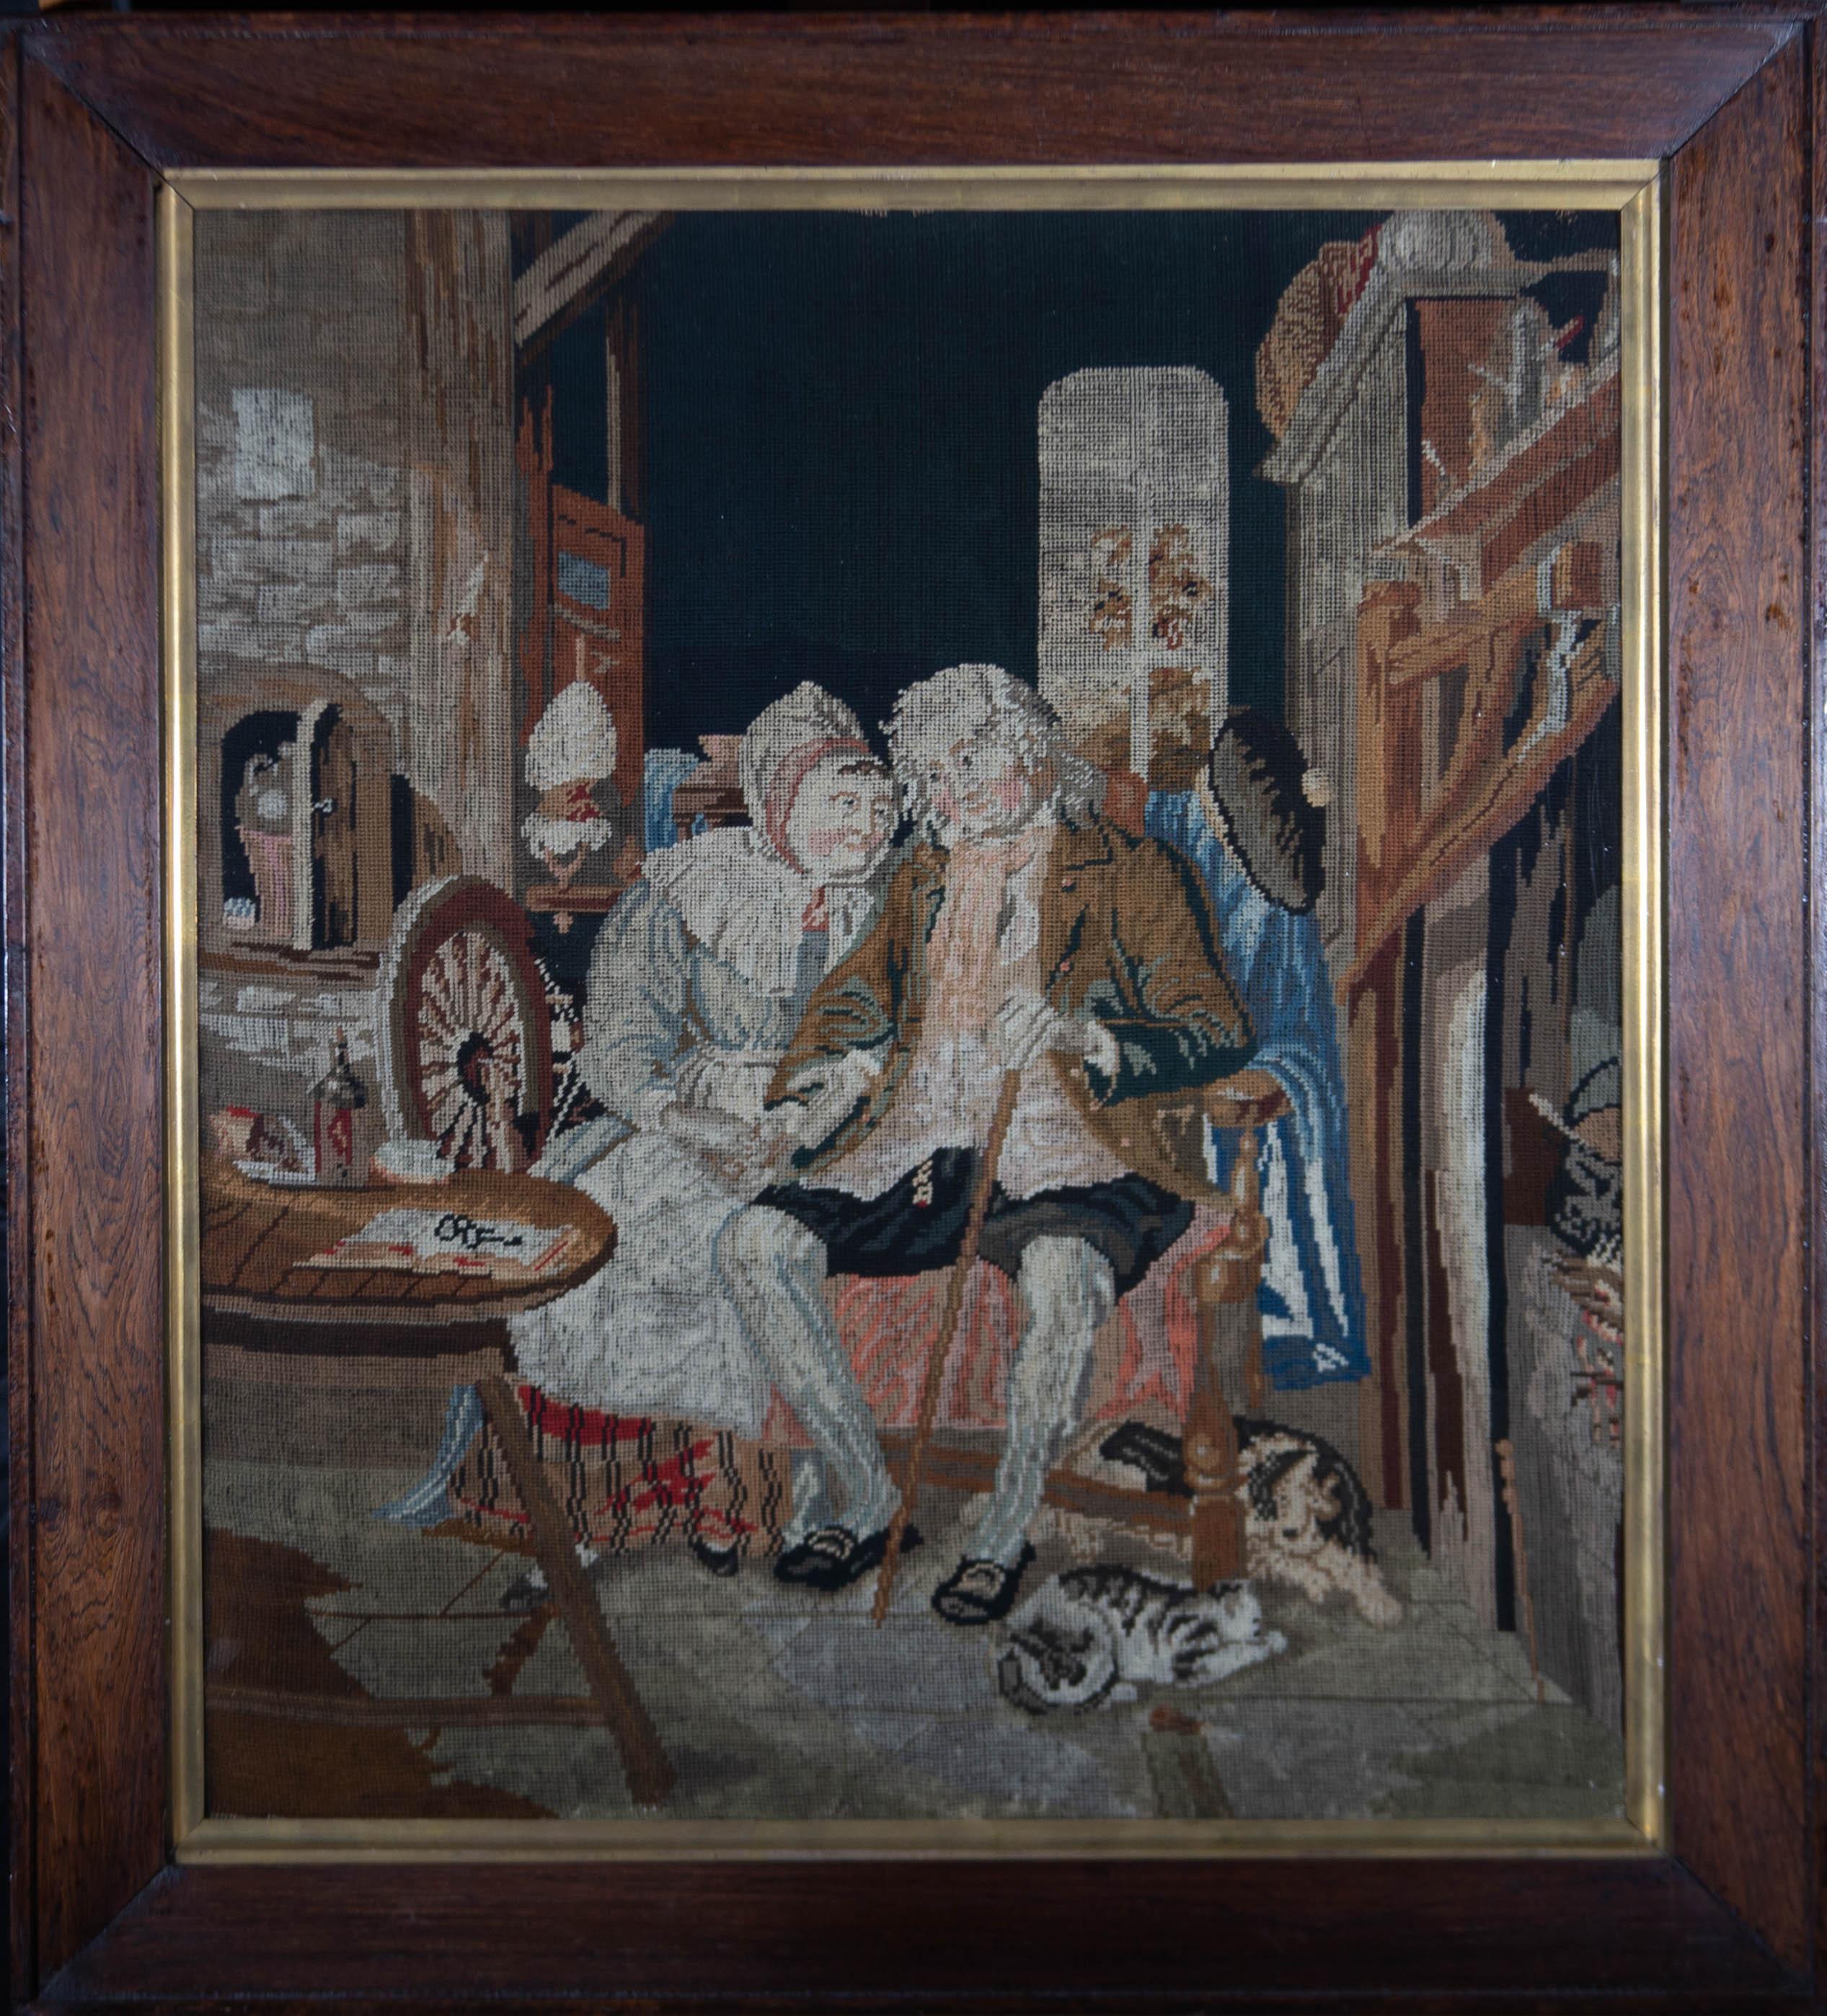 A charming petit point needlework from the late 19th Century, showing a heartwarming scene of an elderly couple sitting in a close embrace in their home with the cat and dog at their feet. The needlework is presented in a yew wood frame with